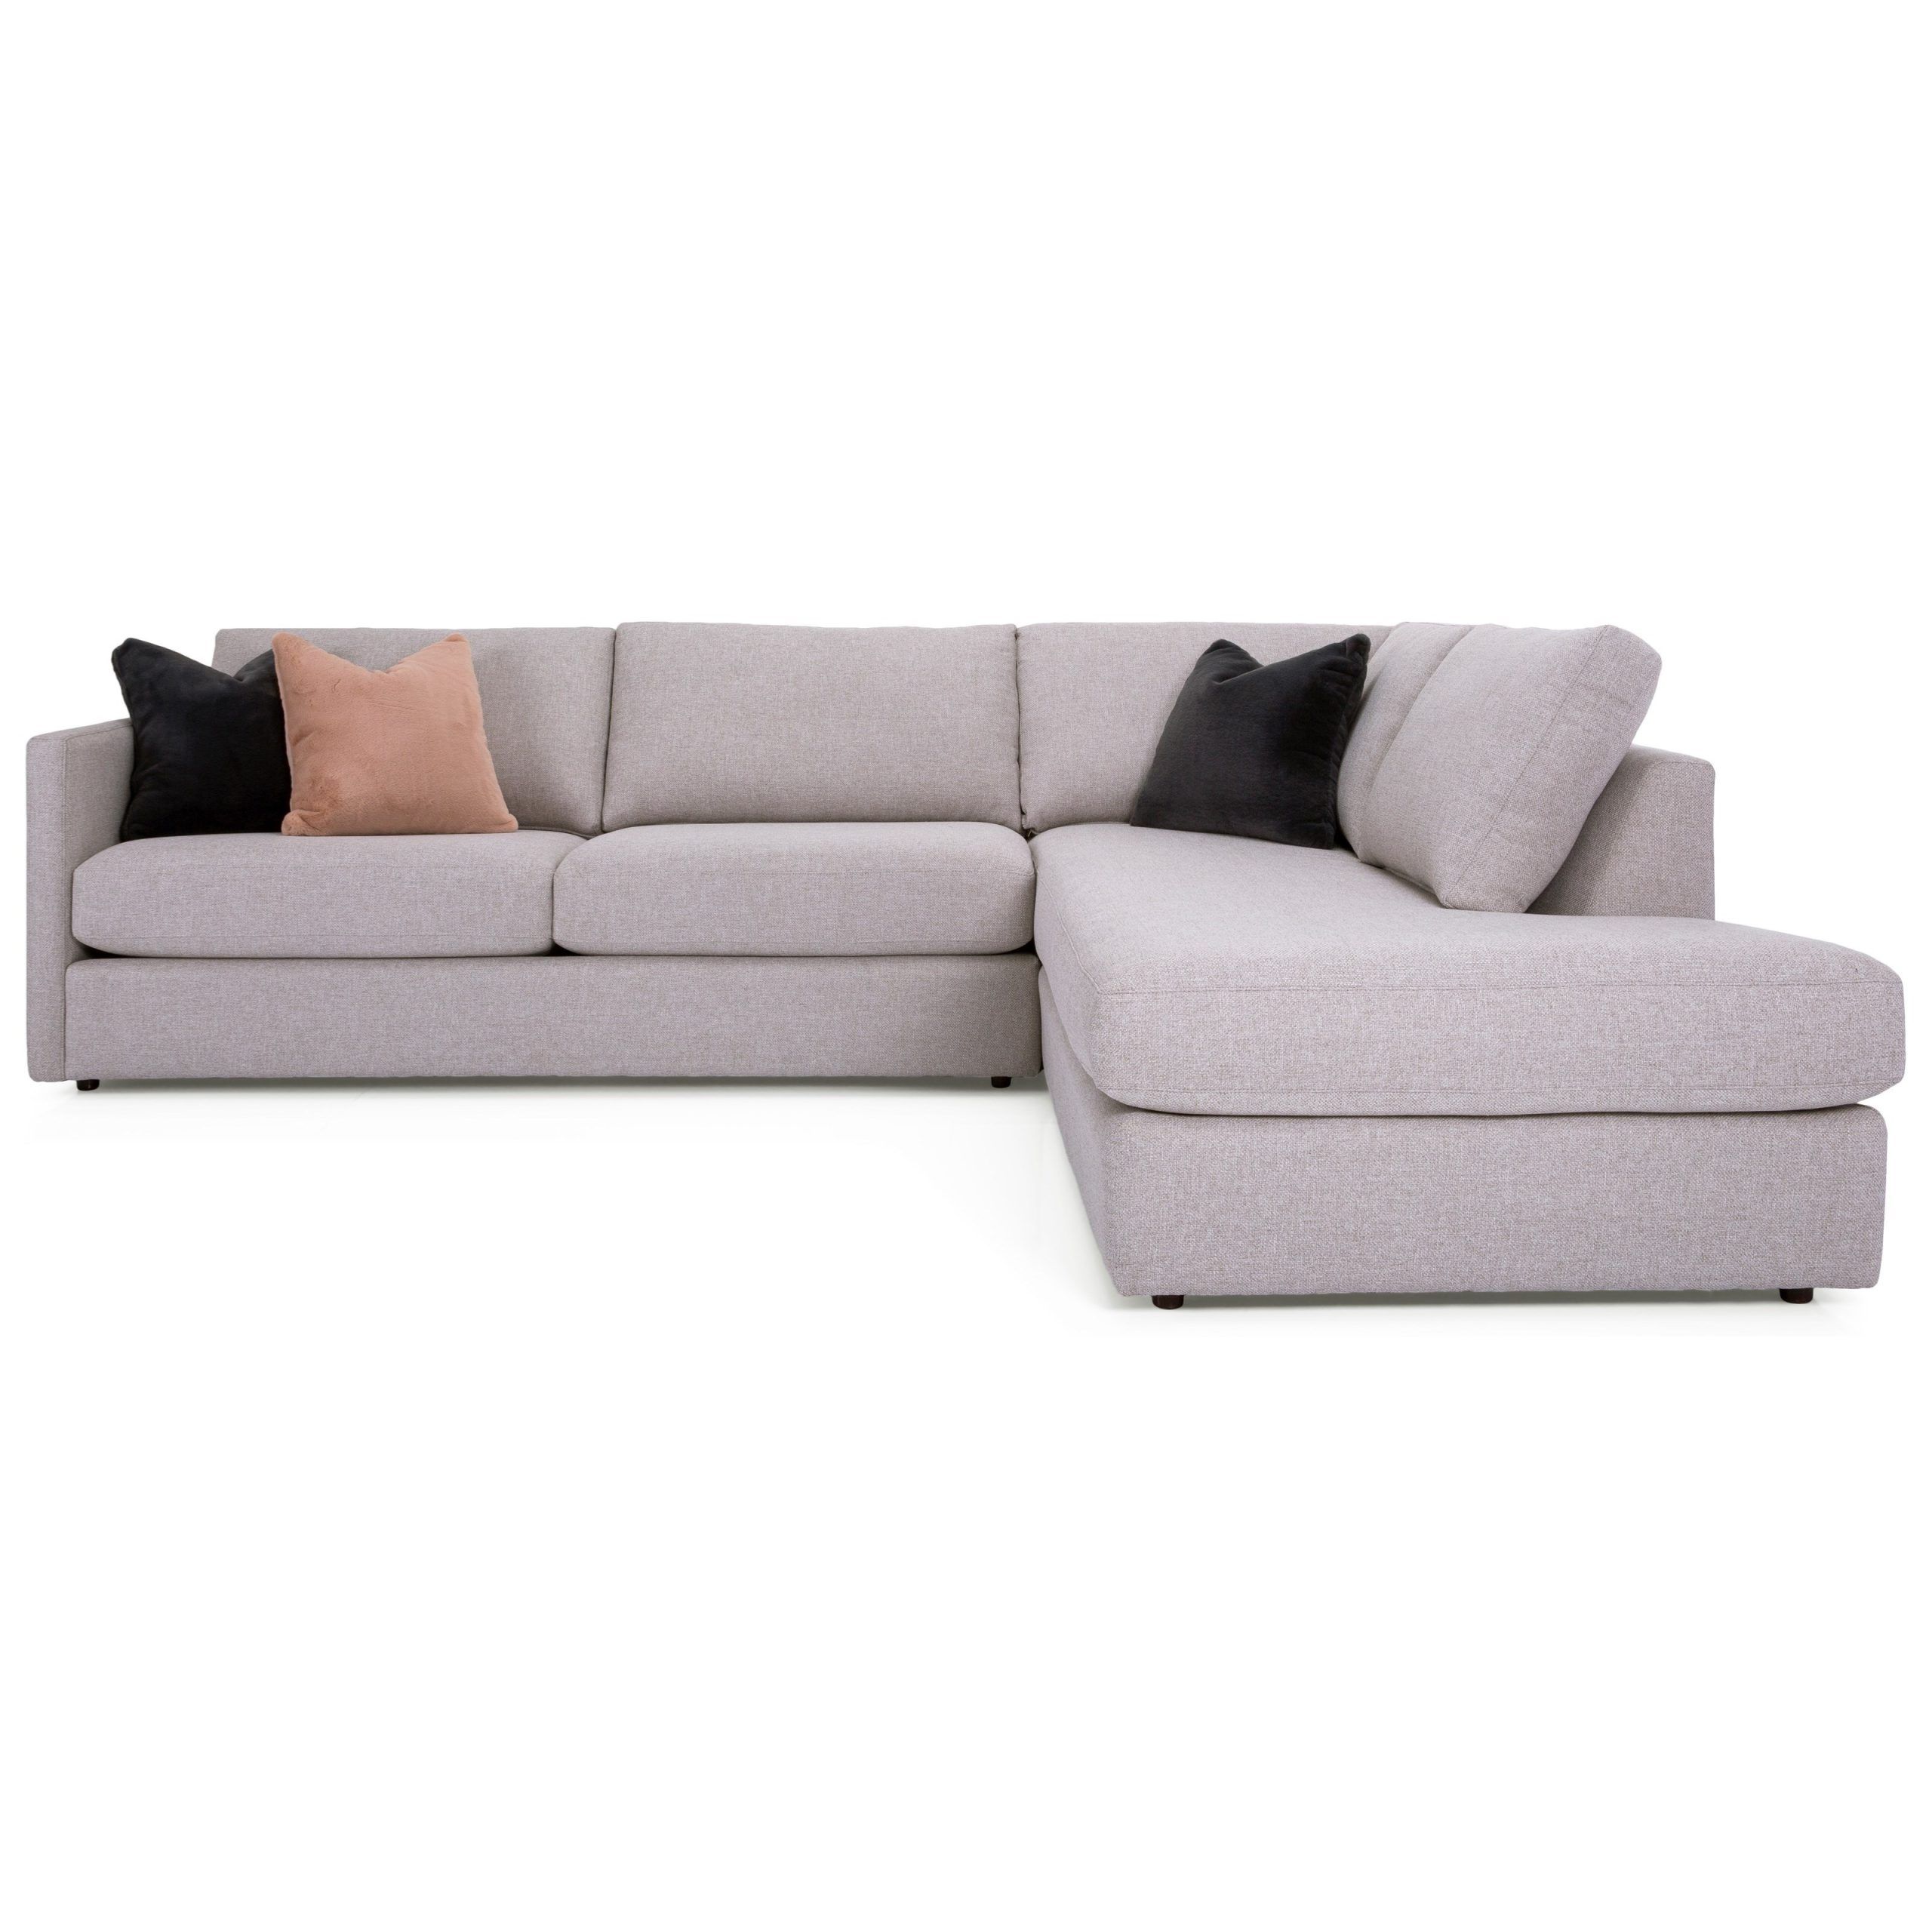 Taelor Designs Tess Contemporary L Shaped Sectional With Chaise In Modern L Shaped Sofa Sectionals (View 17 of 20)